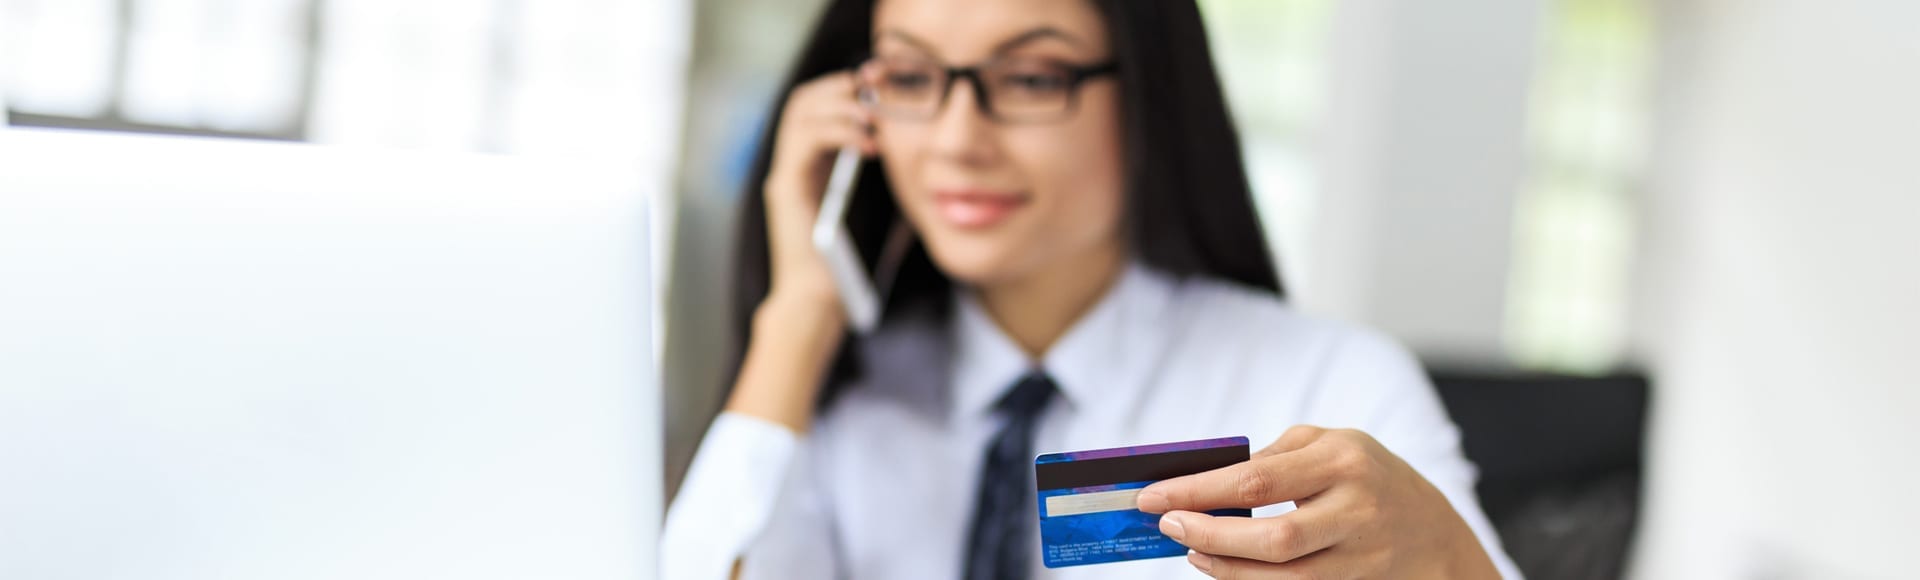 A smiling business woman on the phone holding an aesthetic credit card in hand